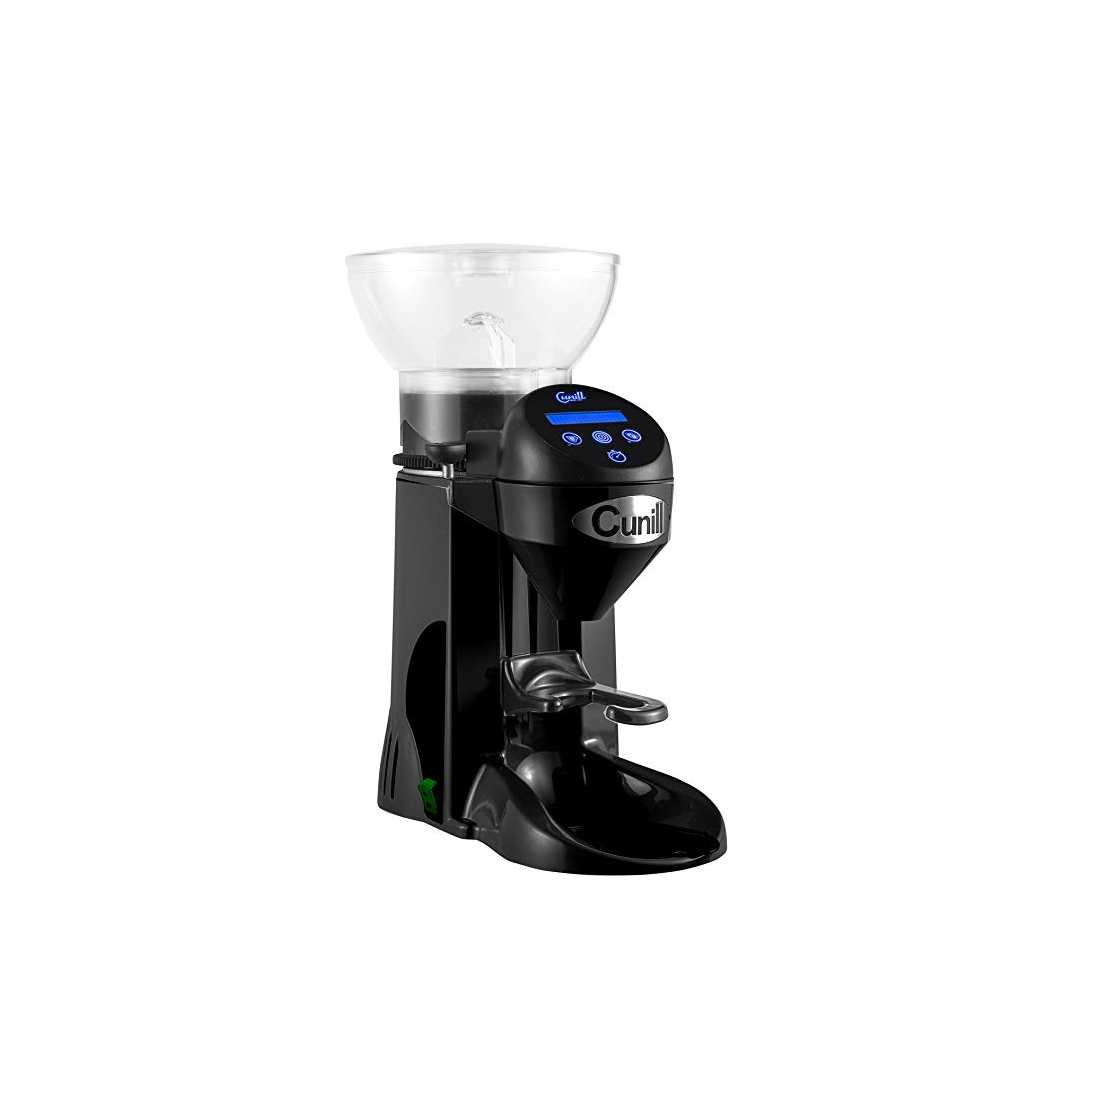 Cunill Tranquilo Tron Automatic On Demand Coffee Grinder|mkayn|مكاين